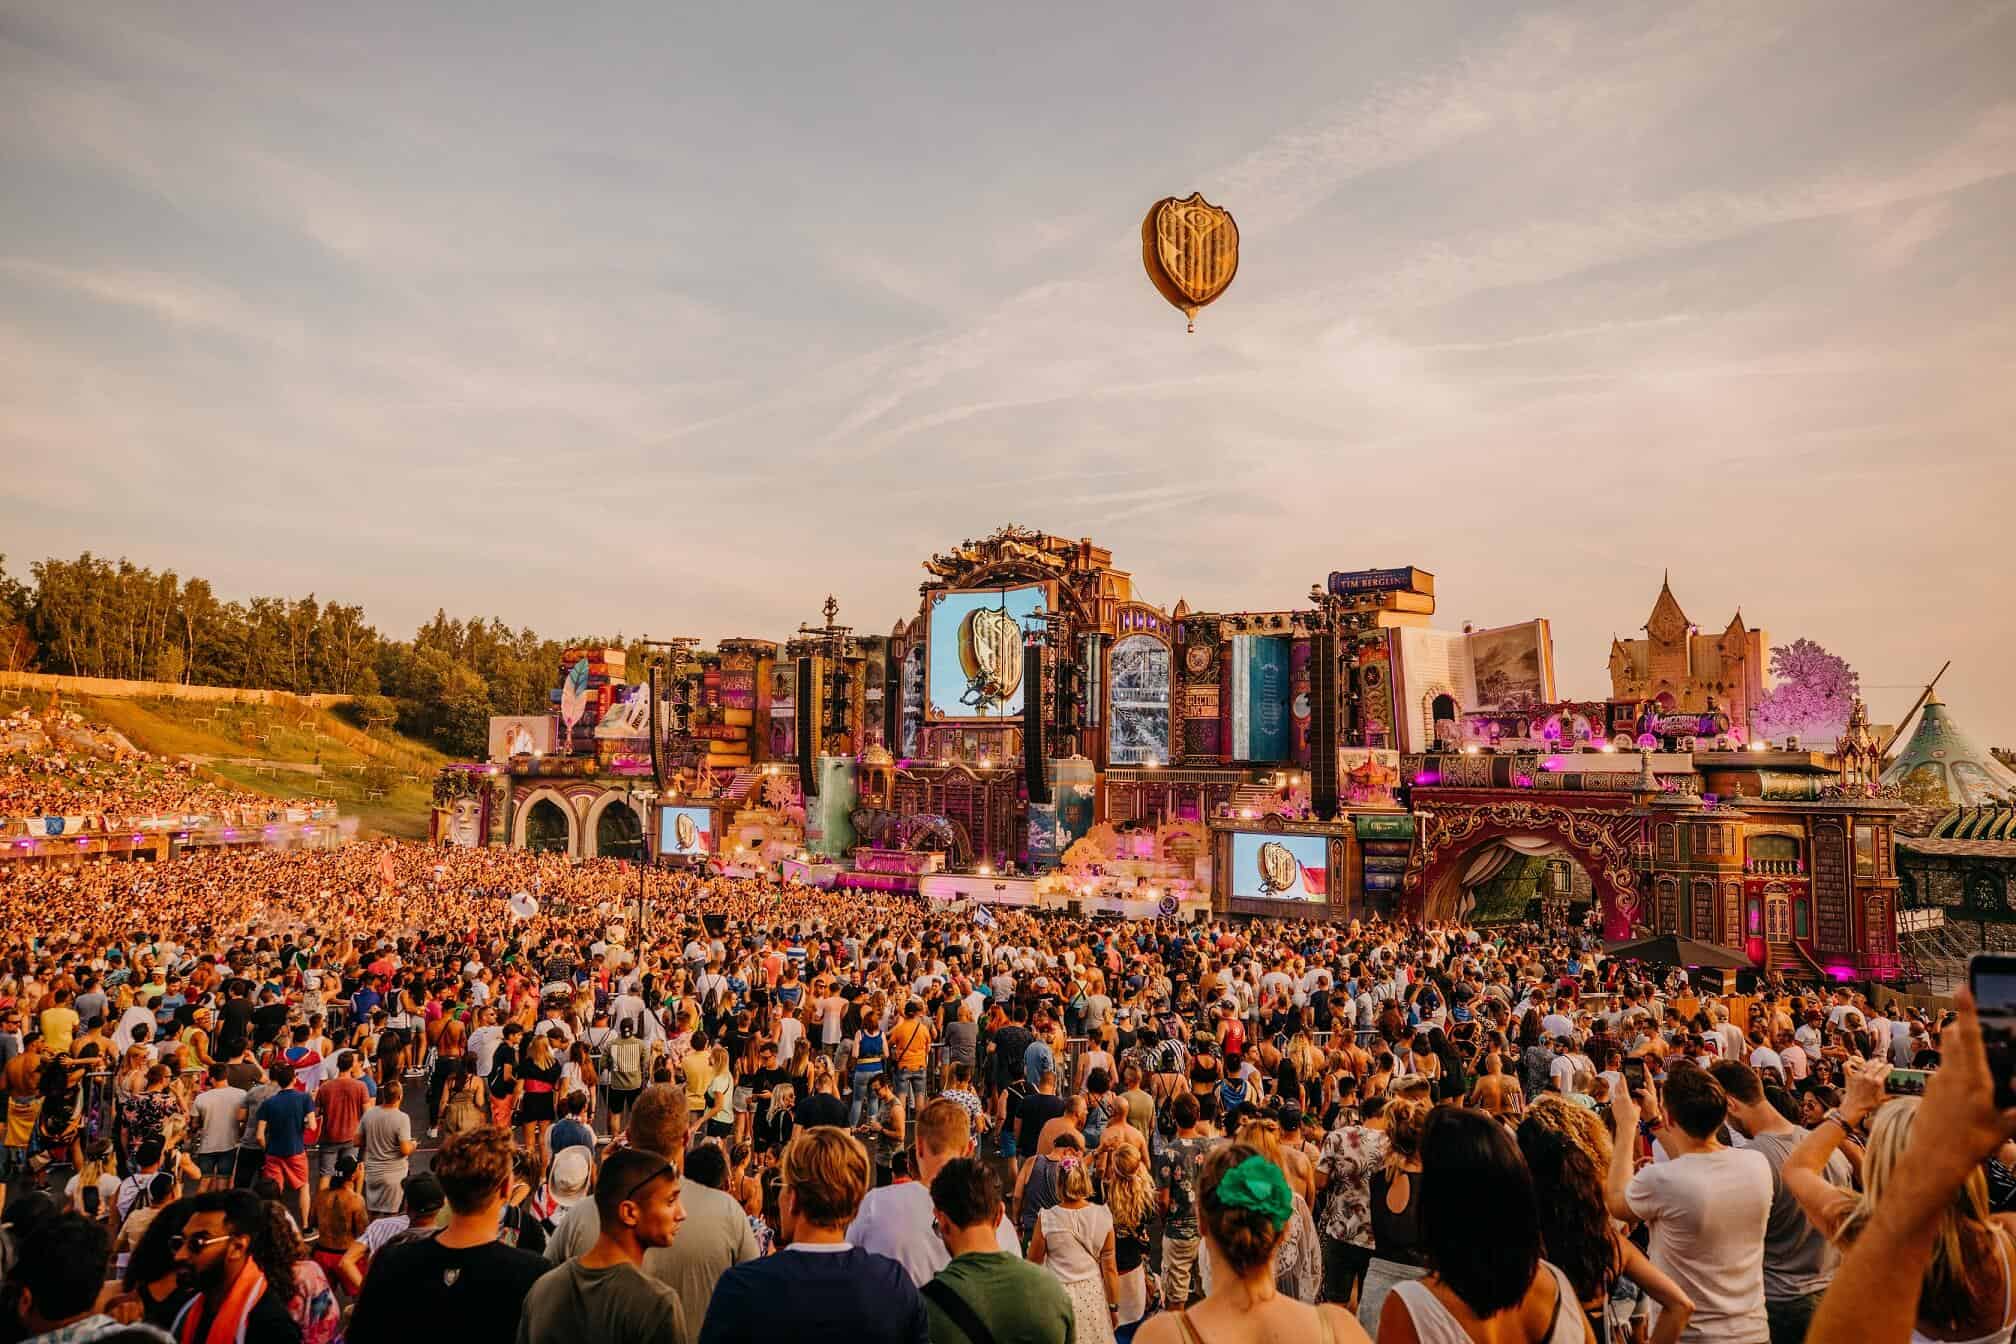 Hardstyle at Tomorrowland 2021 New Year’s Eve: What to Expect?